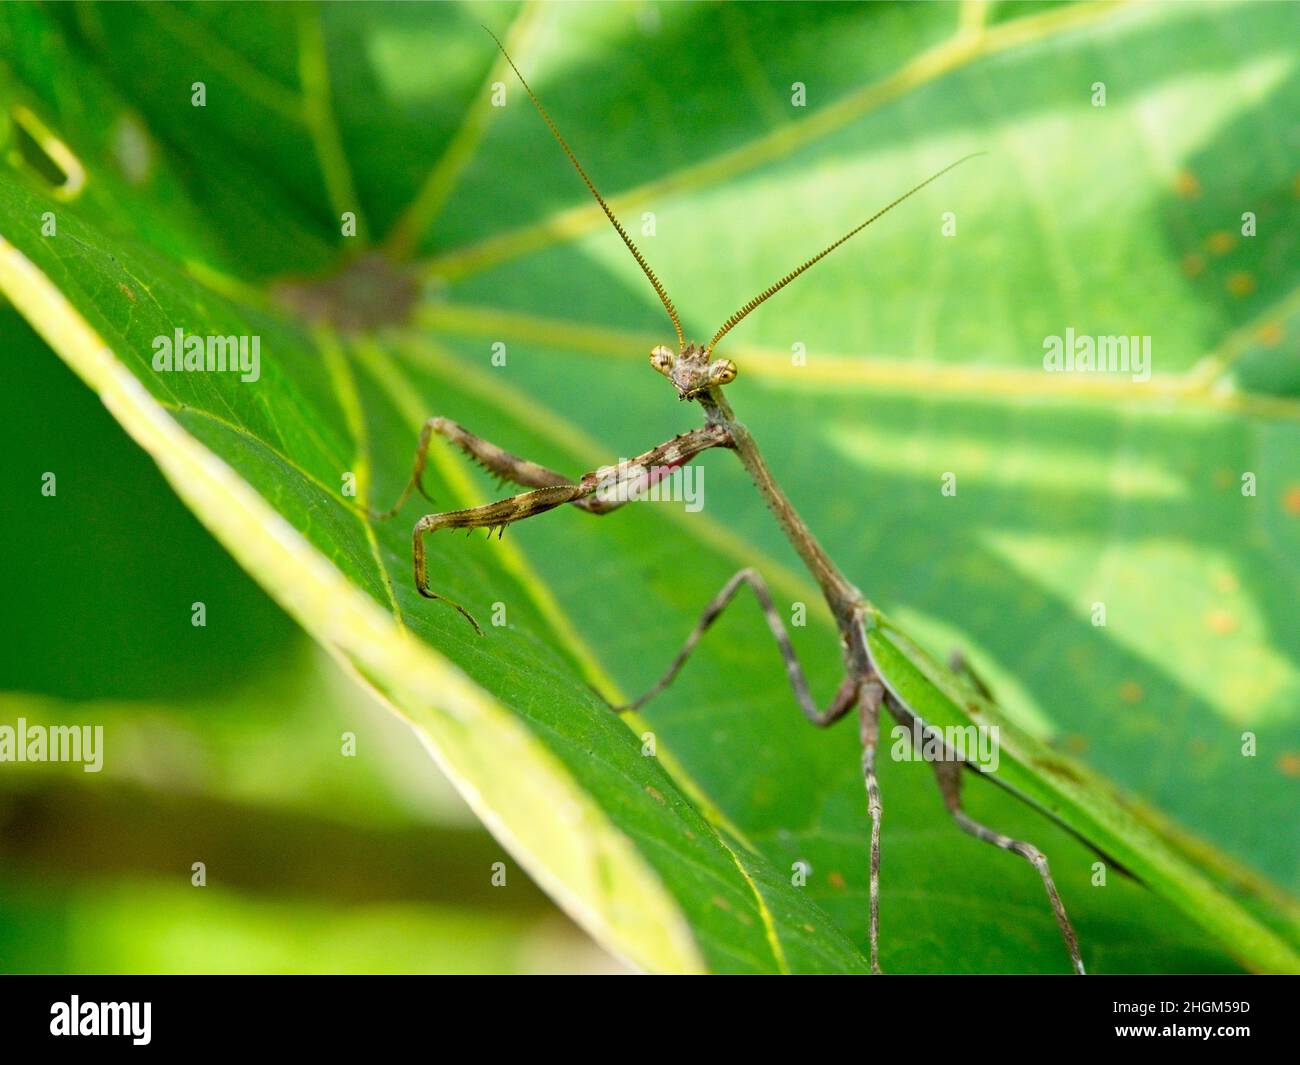 Closeup of a green Praying Mantis (Mantis religiosa) standing upright on leaf looking directly into camera against green background in Vilcabamba, Ecu Stock Photo